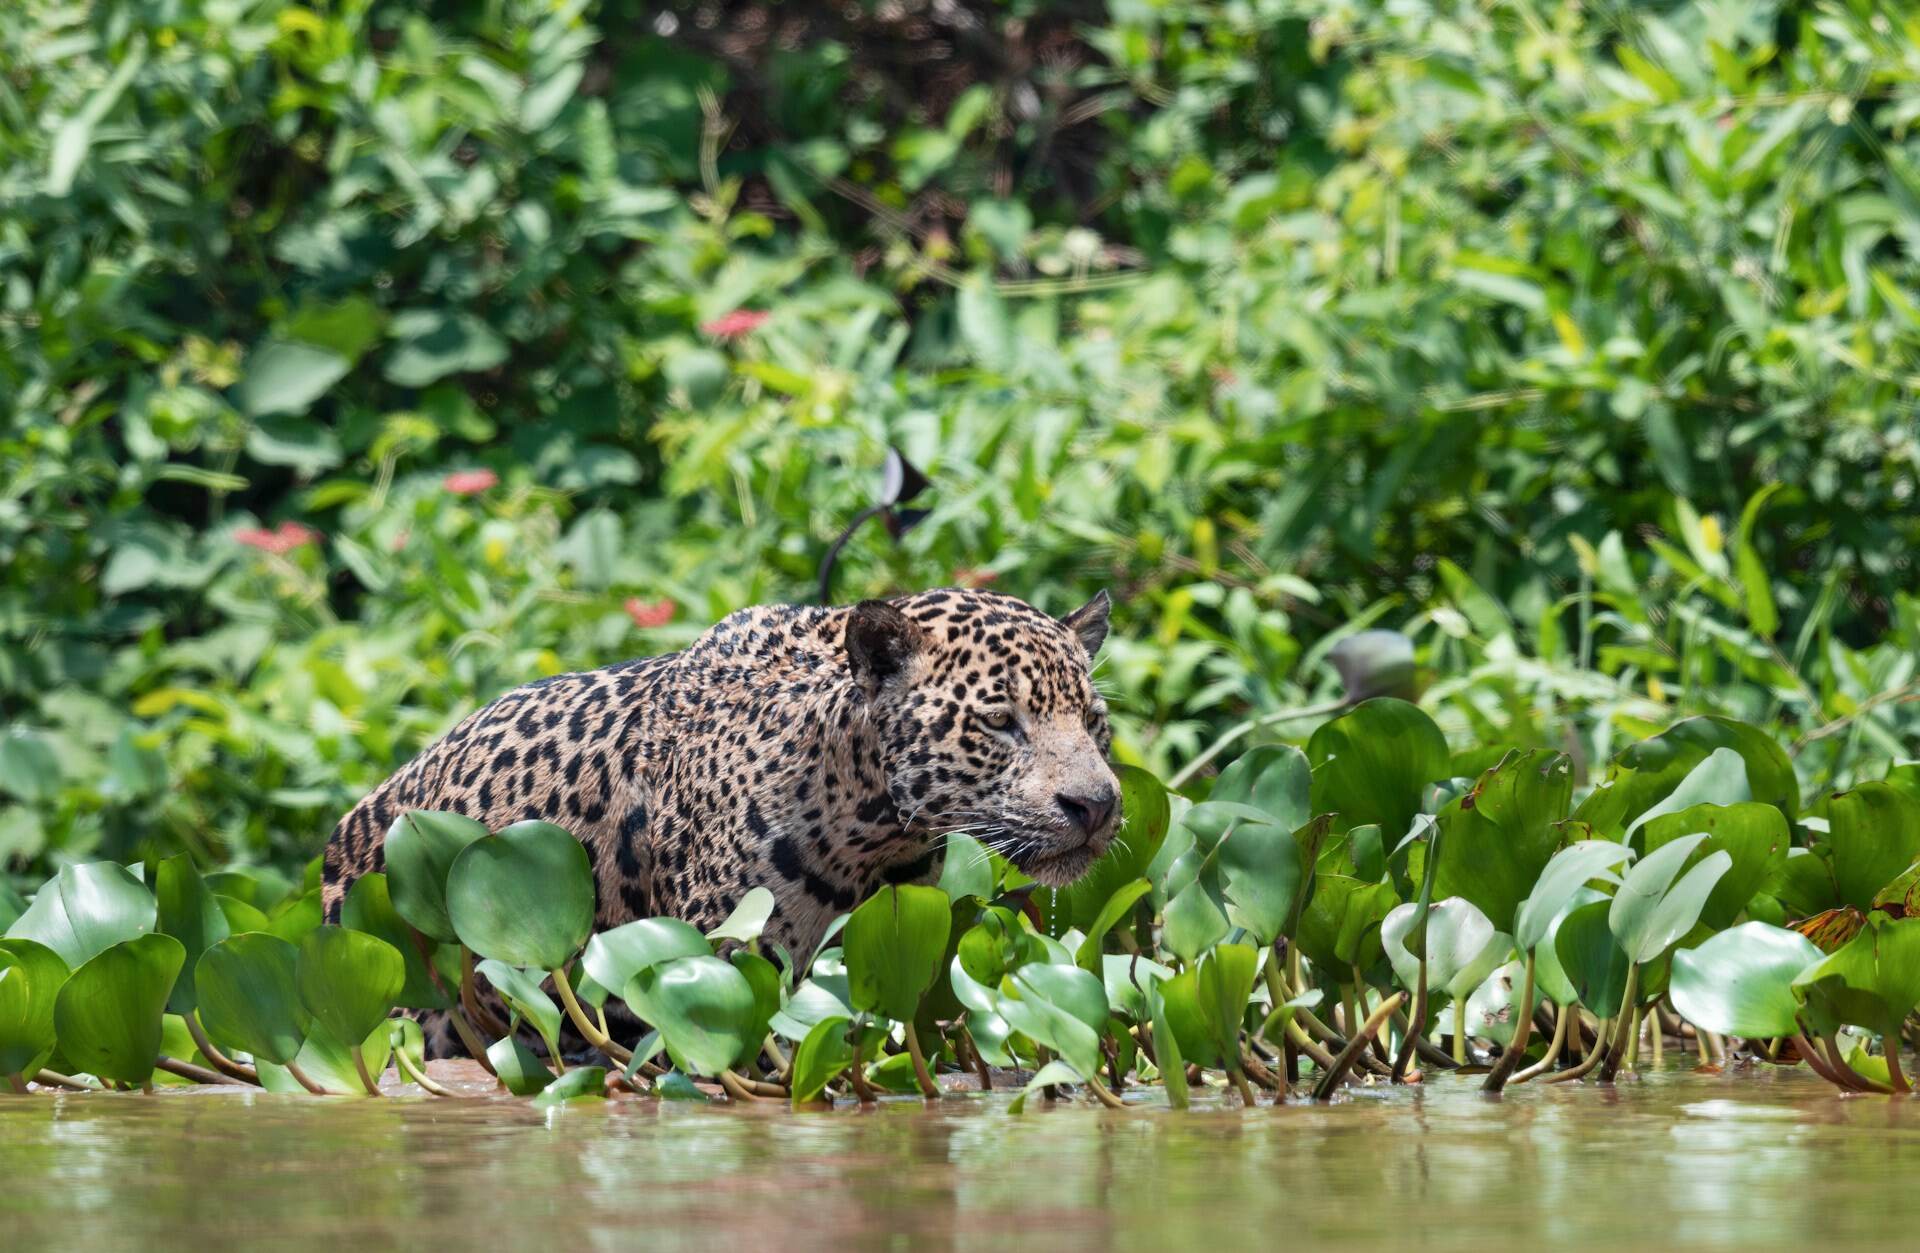 A jaguar swimming in a lake filled with plants